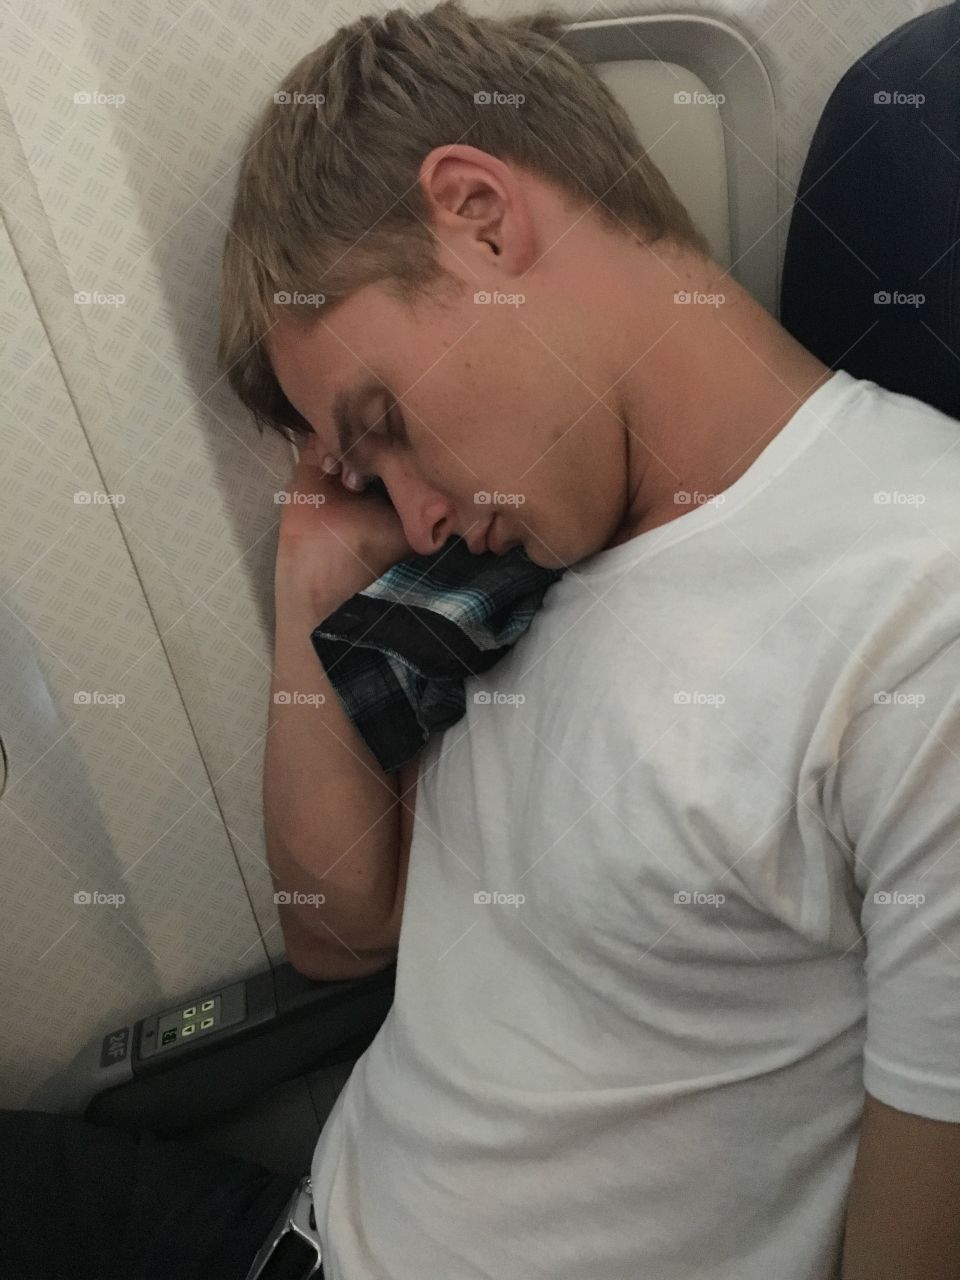 Fell asleep on the plane ride to Seattle, WA! This is my bf of two years. He is Russian, his name is Igo